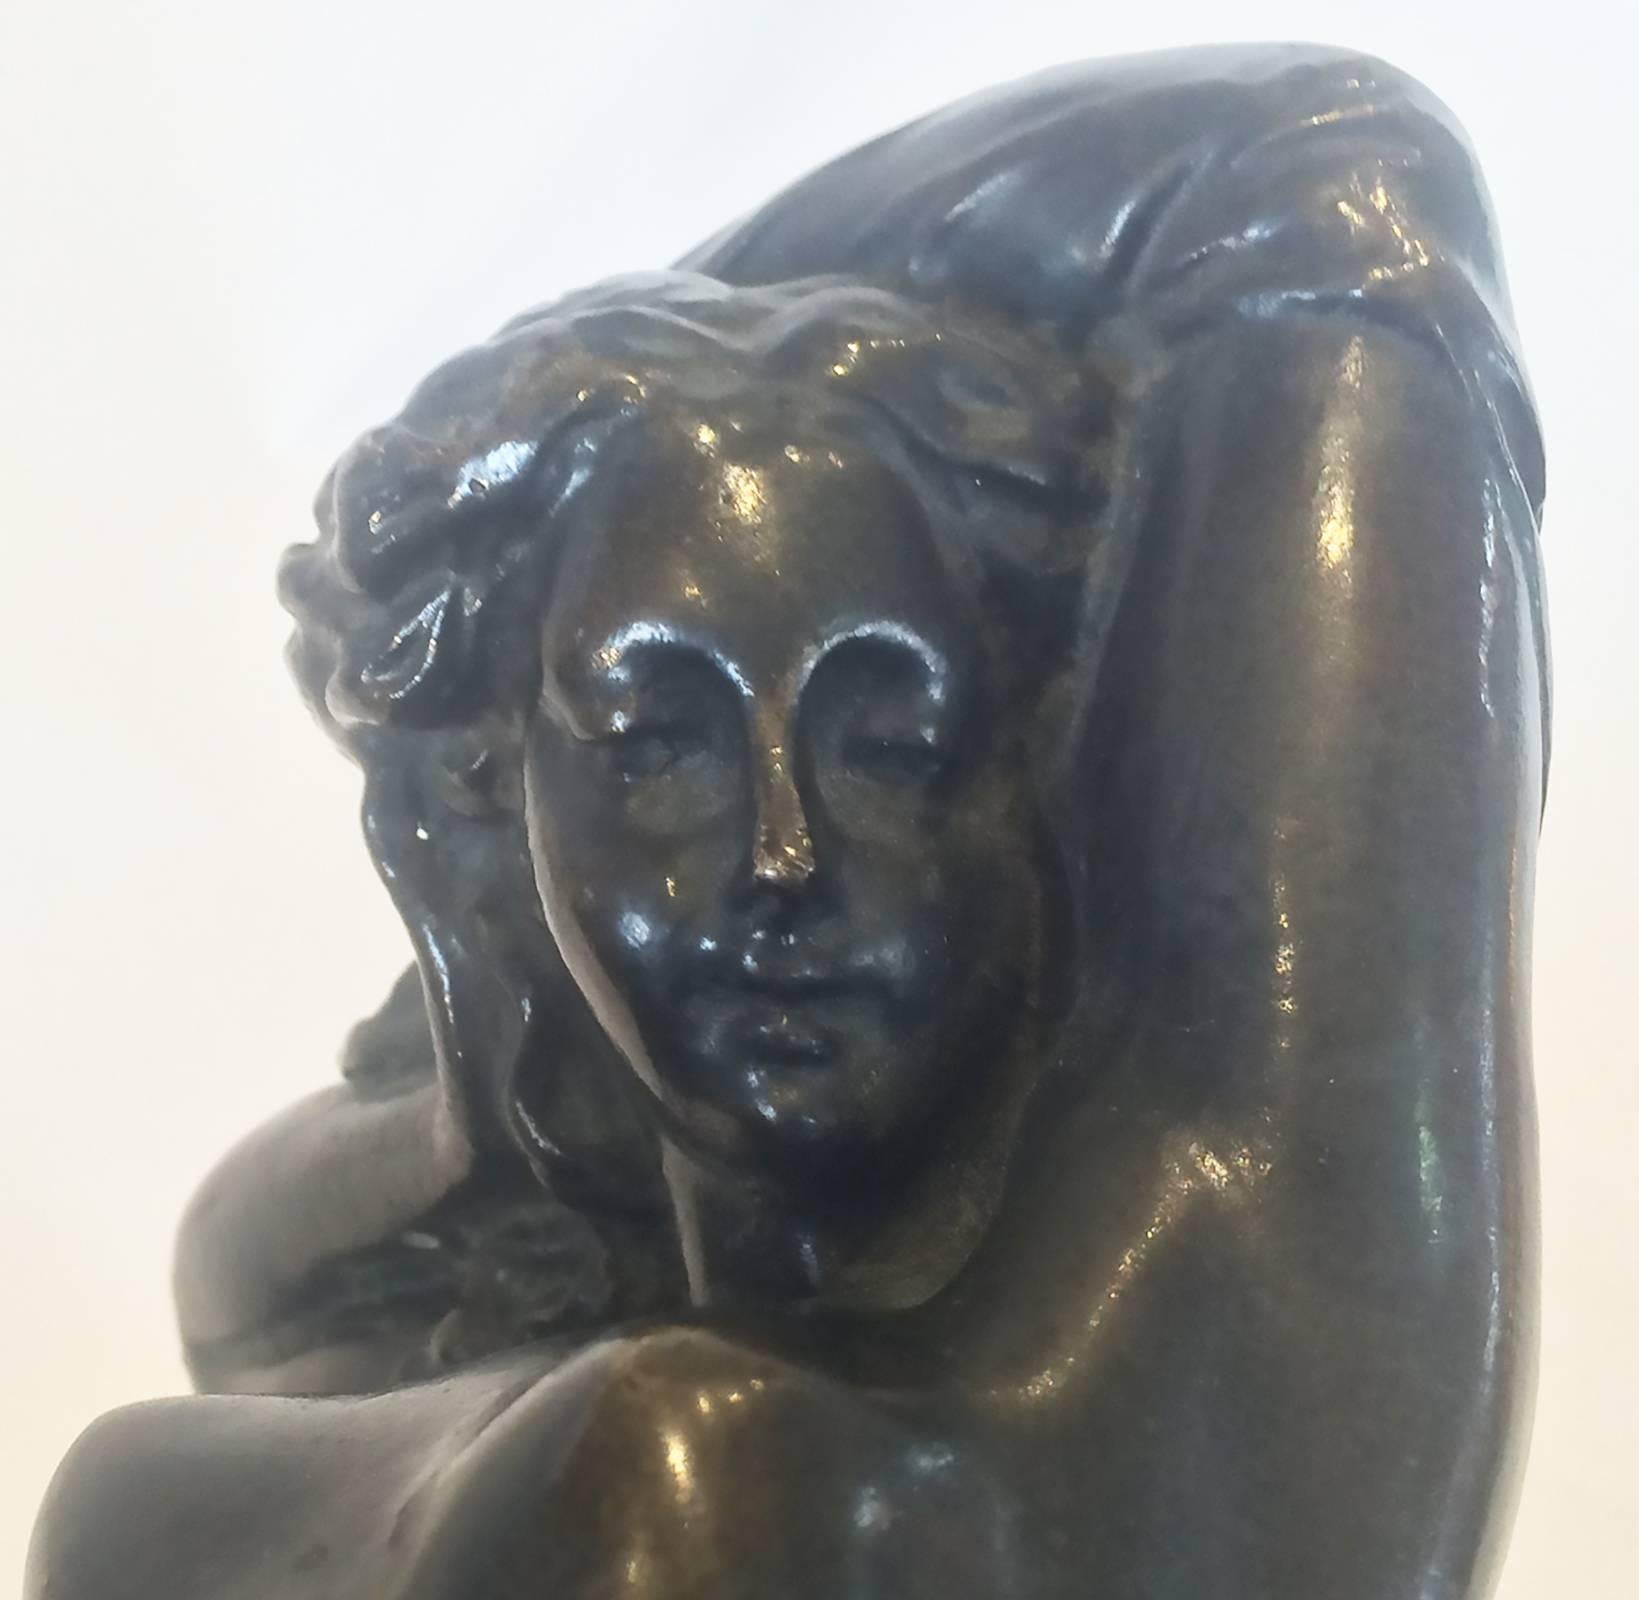 Art Deco reclining nude bronze, by the “Lost Wax” method, with the Foundry Seal “Cire De Marcu Perdue”. Magnificent old piece in excellent condition and fine detail. Dimensions are approximately: 26 cm wide x 12.5 cm high x 11 cm deep (max.), circa